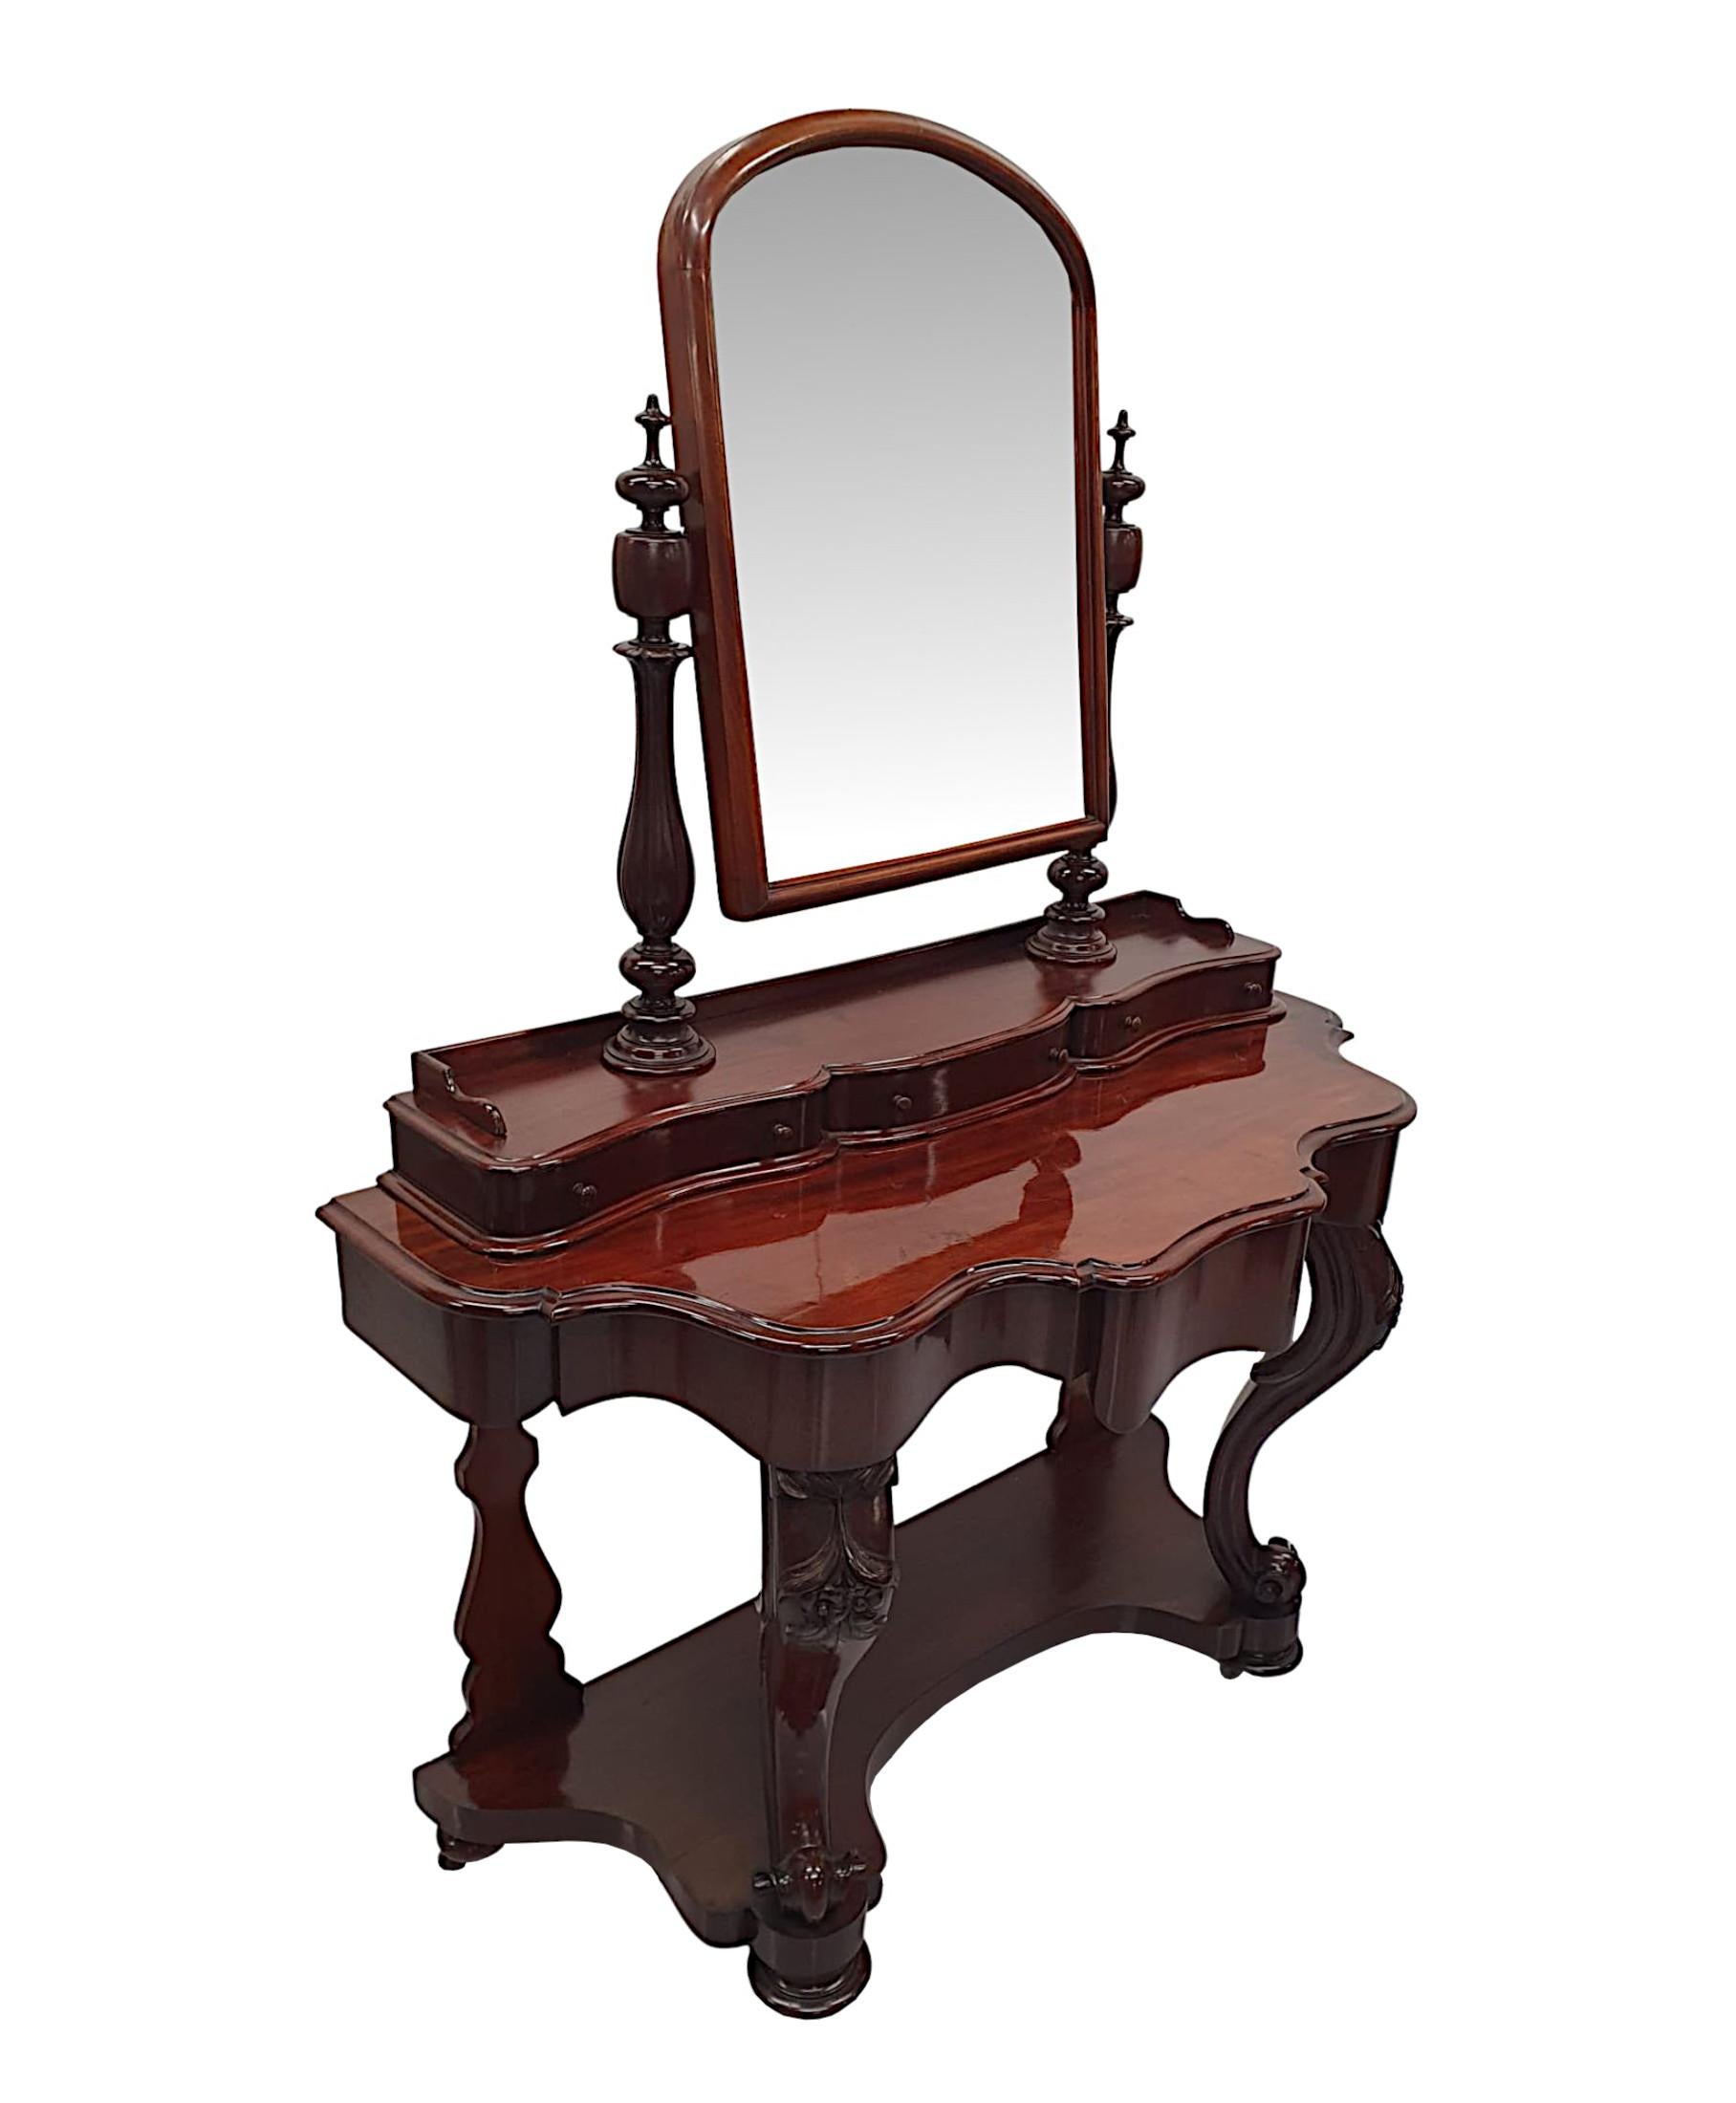 A stunning 19th Century mahogany duchess dressing table of gorgeous quality, finely hand carved with rich patination and grain. The moulded top surmounted with adjustable mirror glass plate of arch top form set within fluted mahogany frame flanked